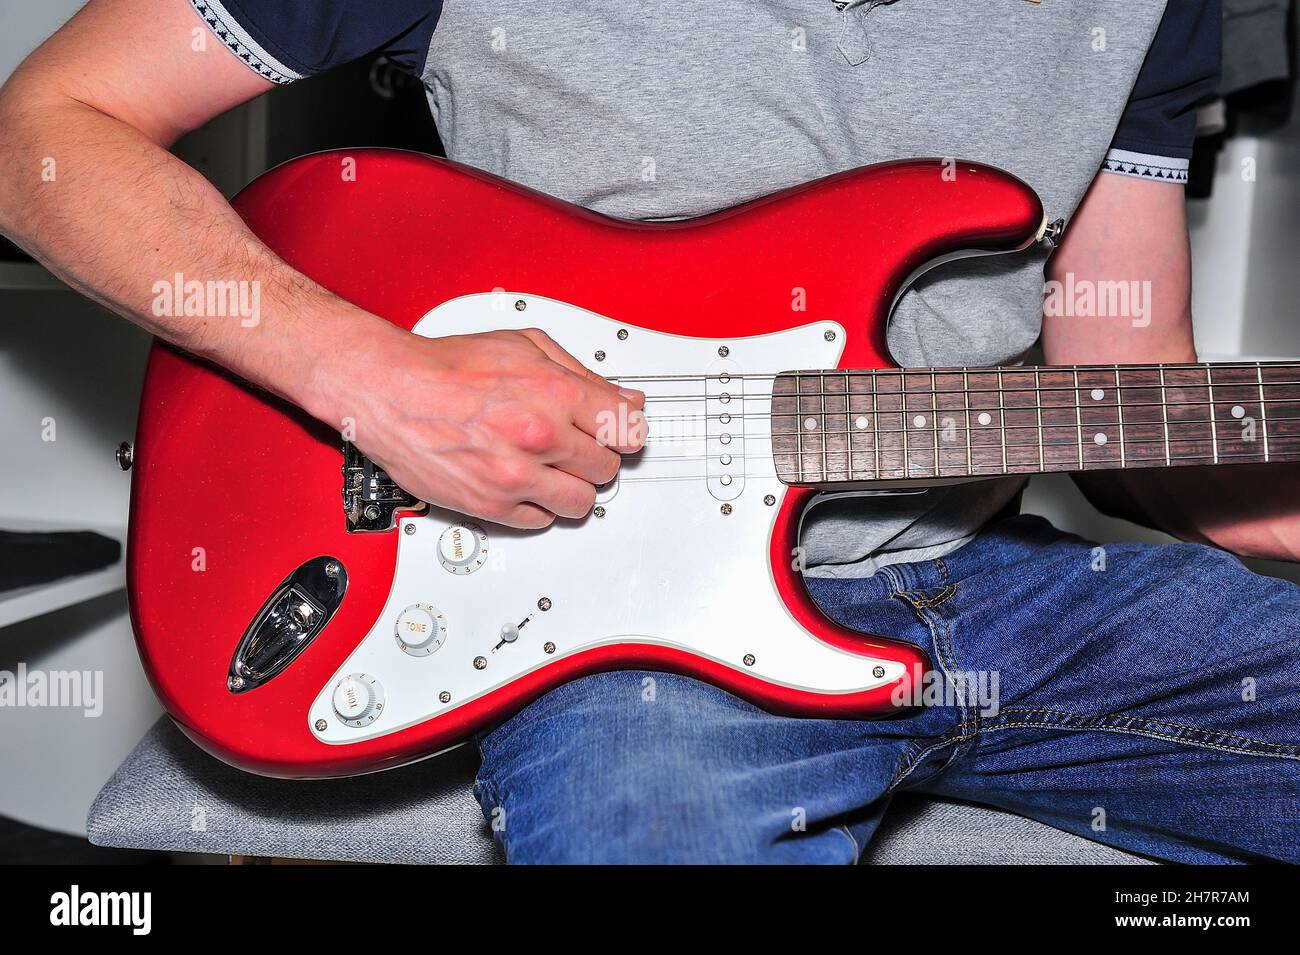 Young boy playing electric guitar. Stock Photo